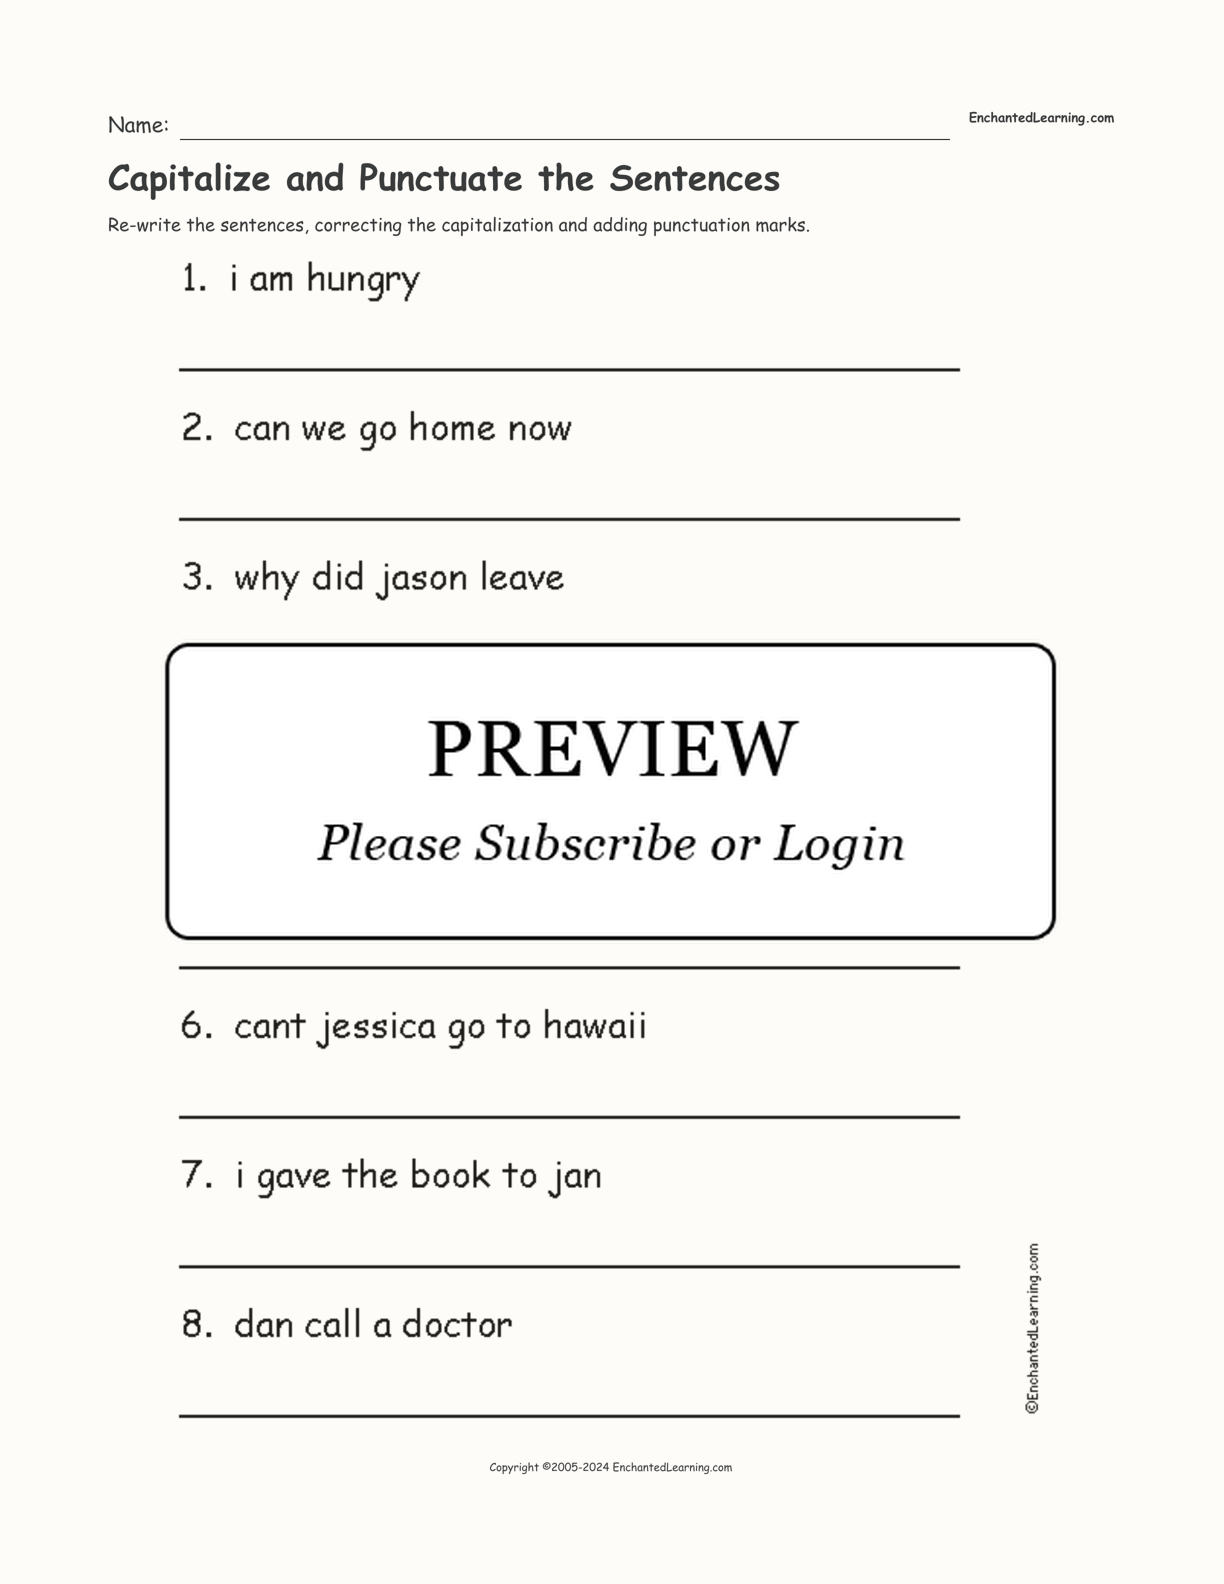 Capitalize and Punctuate the Sentences interactive worksheet page 1